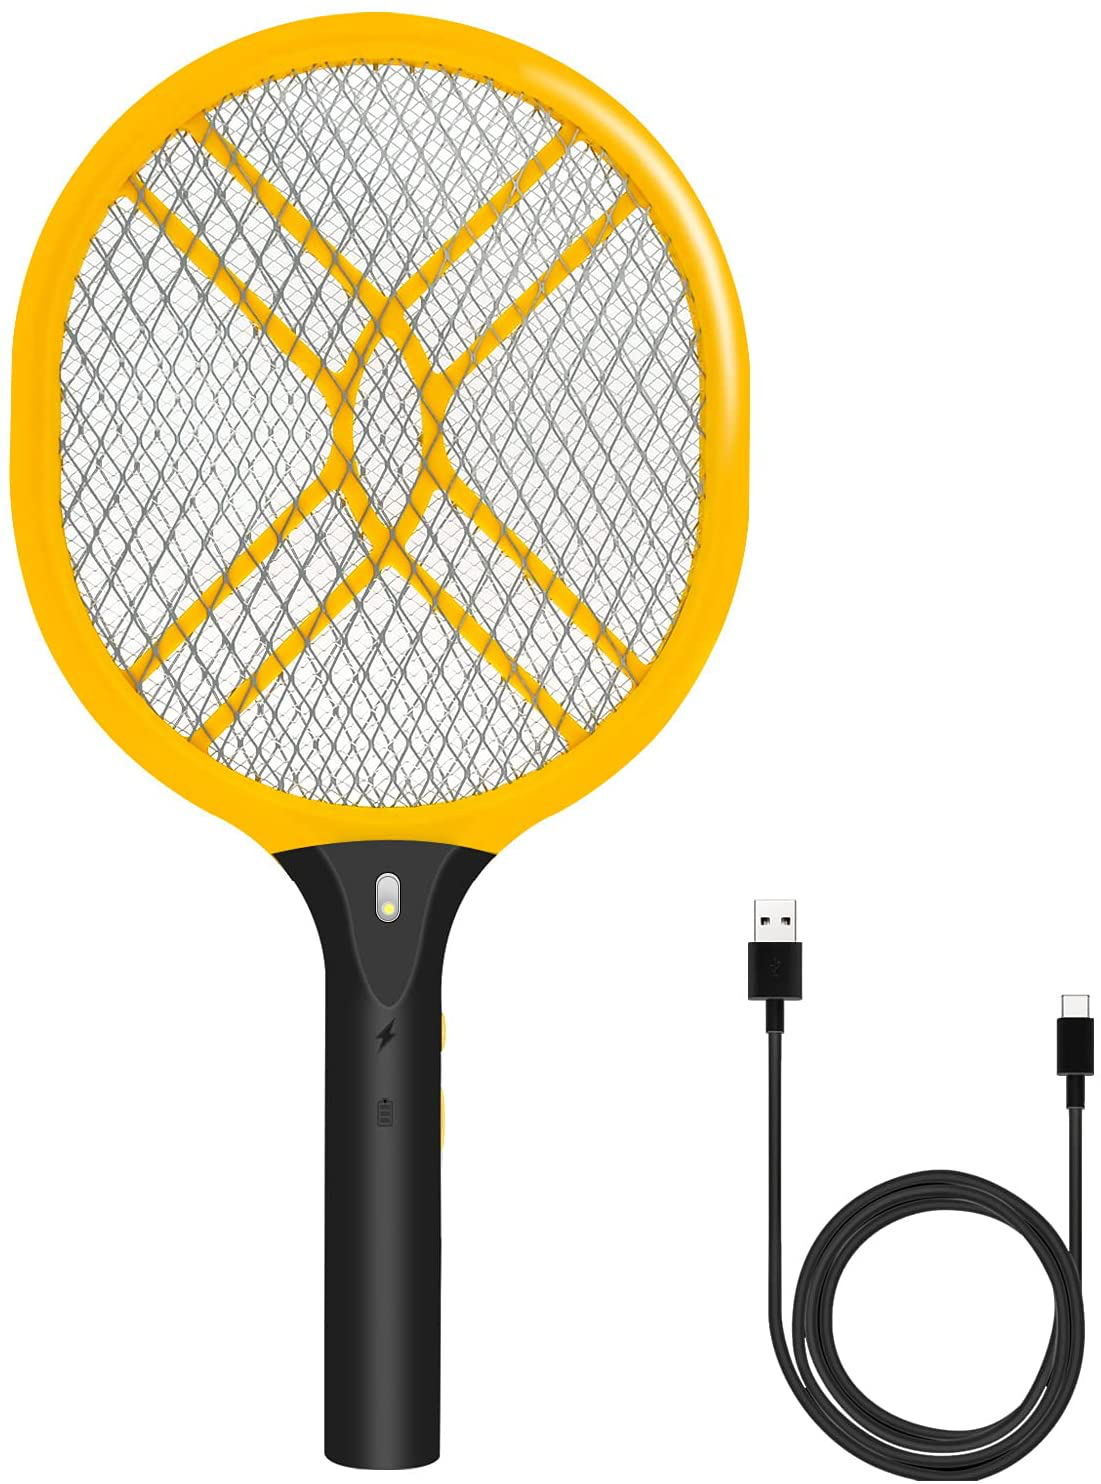 Faicuk Handheld Bug Zapper Racket Rechargeable Mosquito Killer (1 Pack)